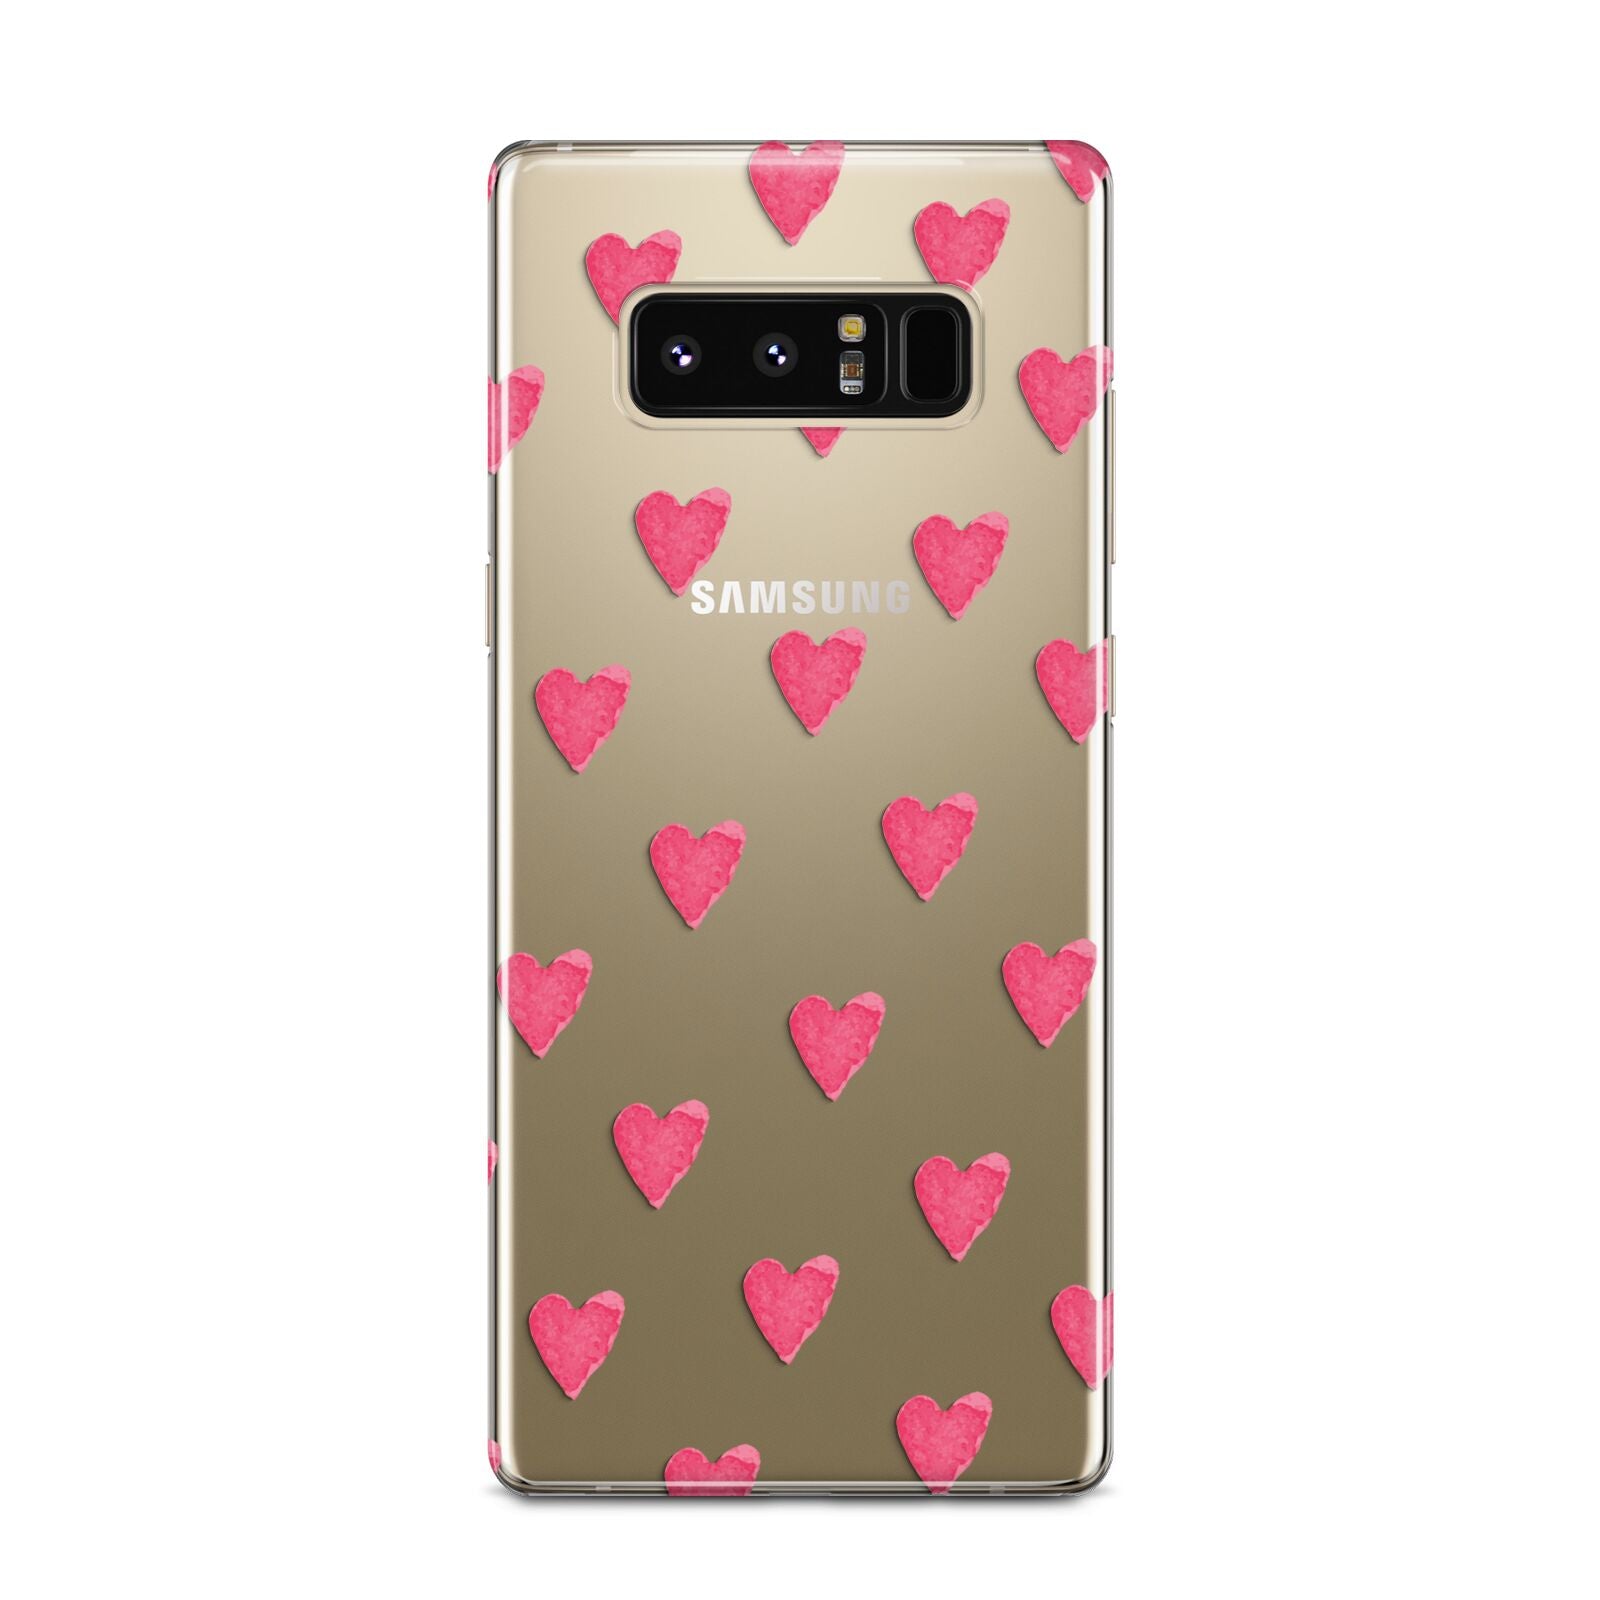 Heart Patterned Samsung Galaxy Note 8 Case